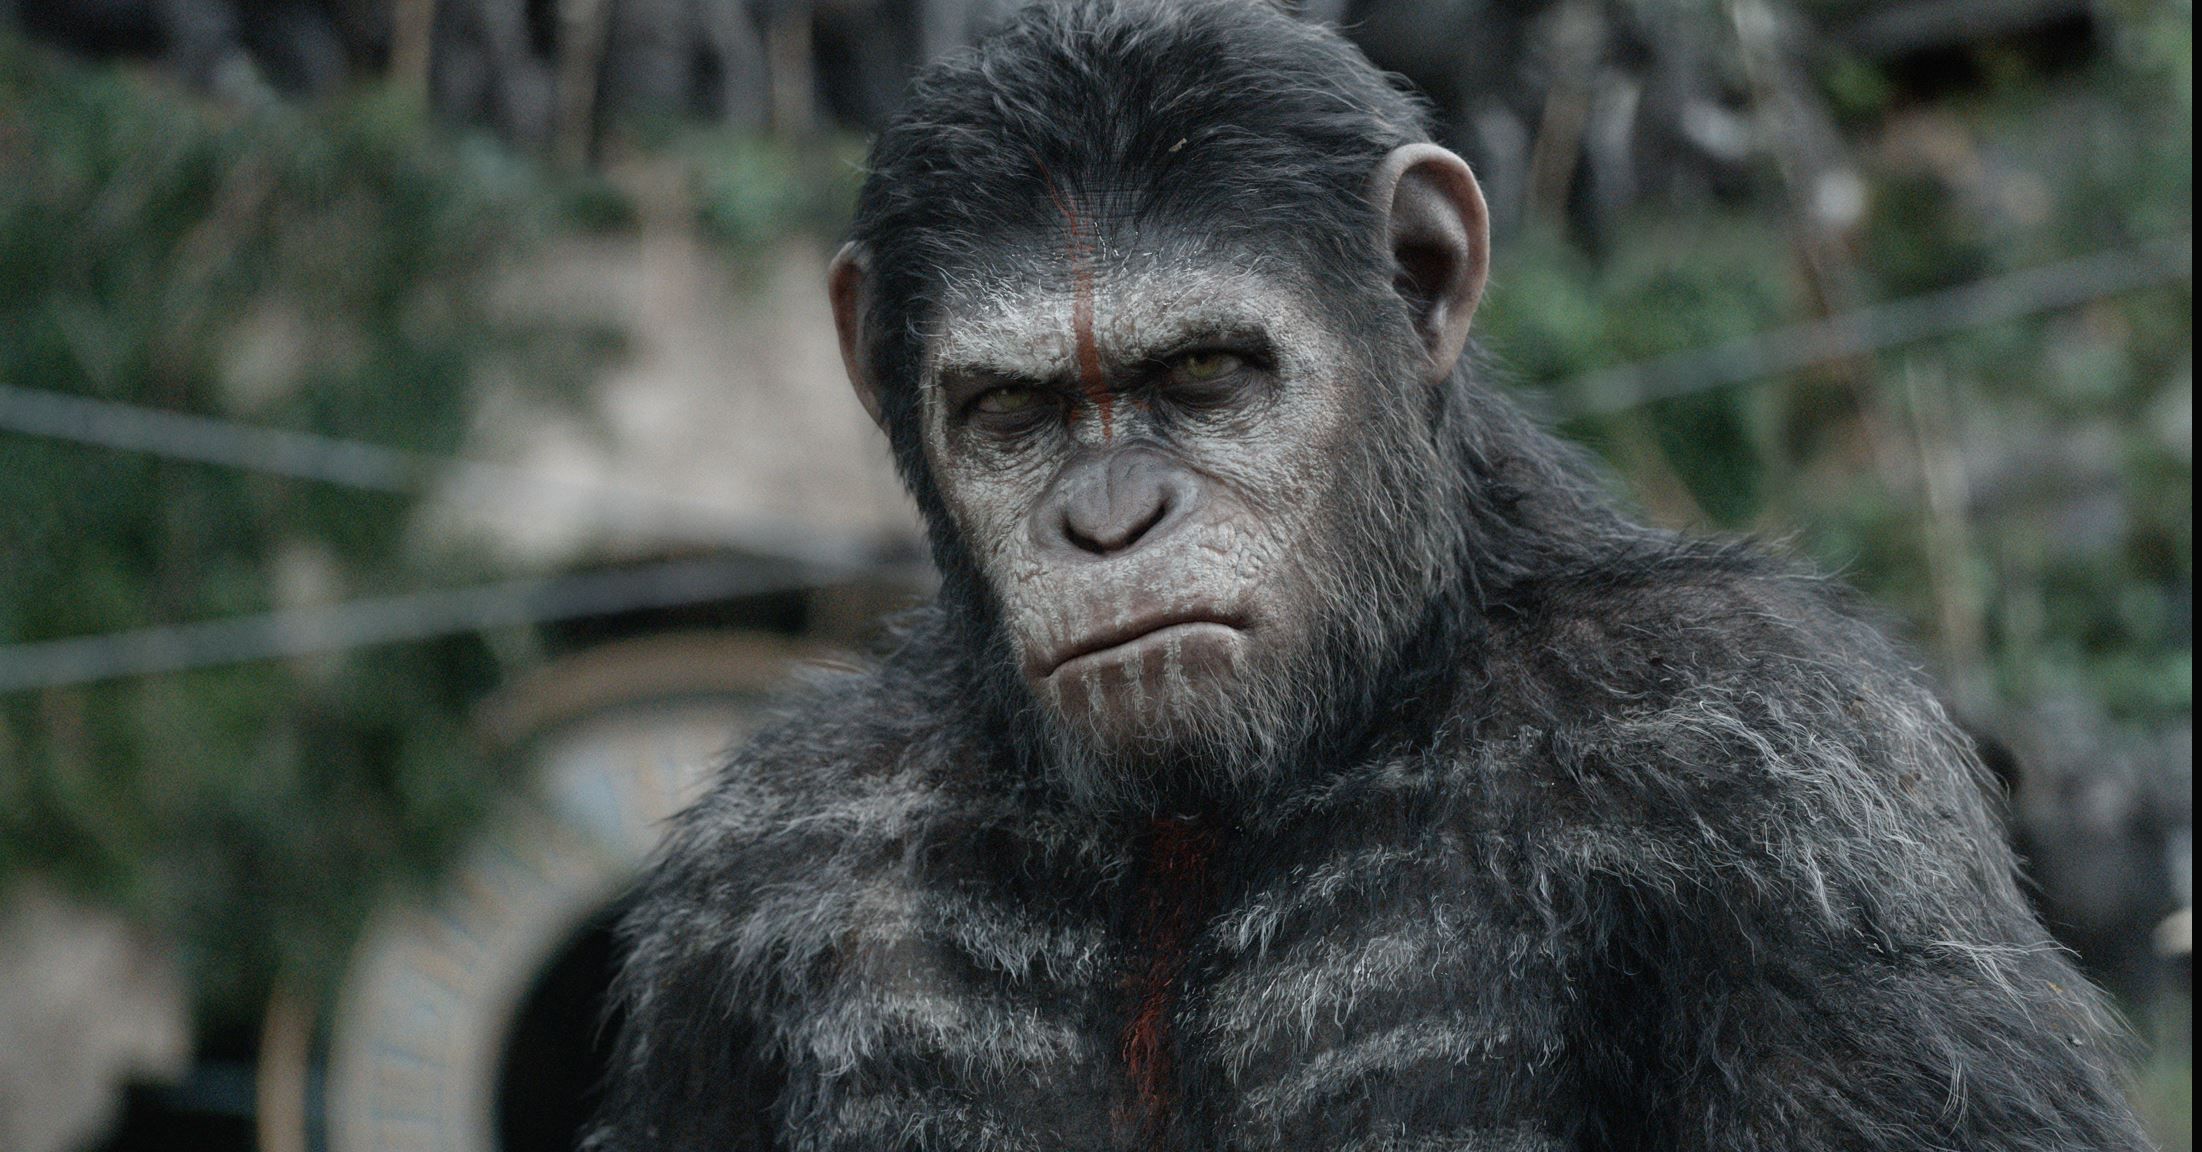 Úsvit planety opic Dawn of the Planet of the Apes